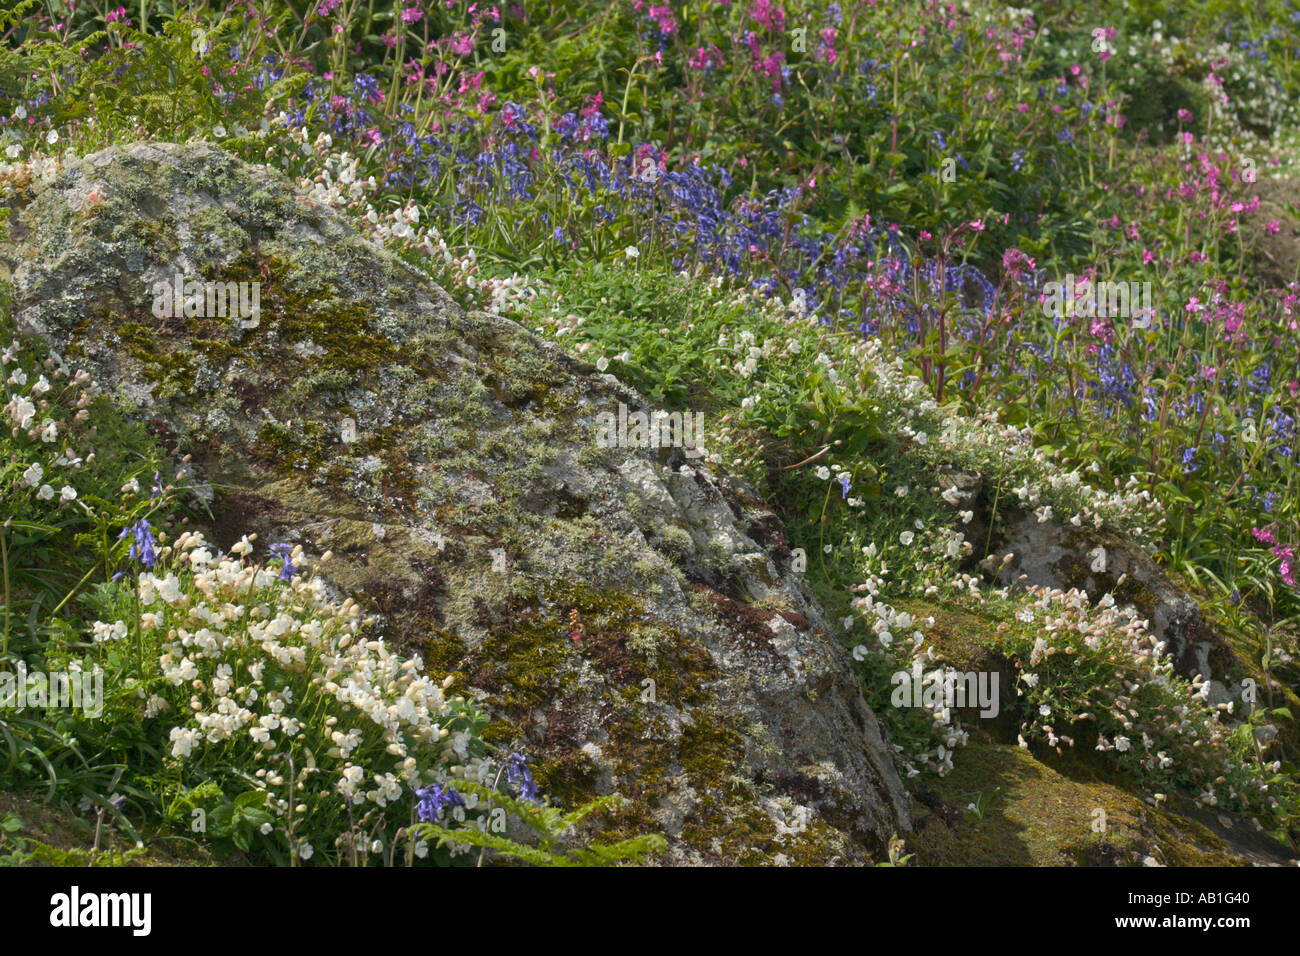 Bluebells and white Campion flowers on Skomer Island, Wales Stock Photo